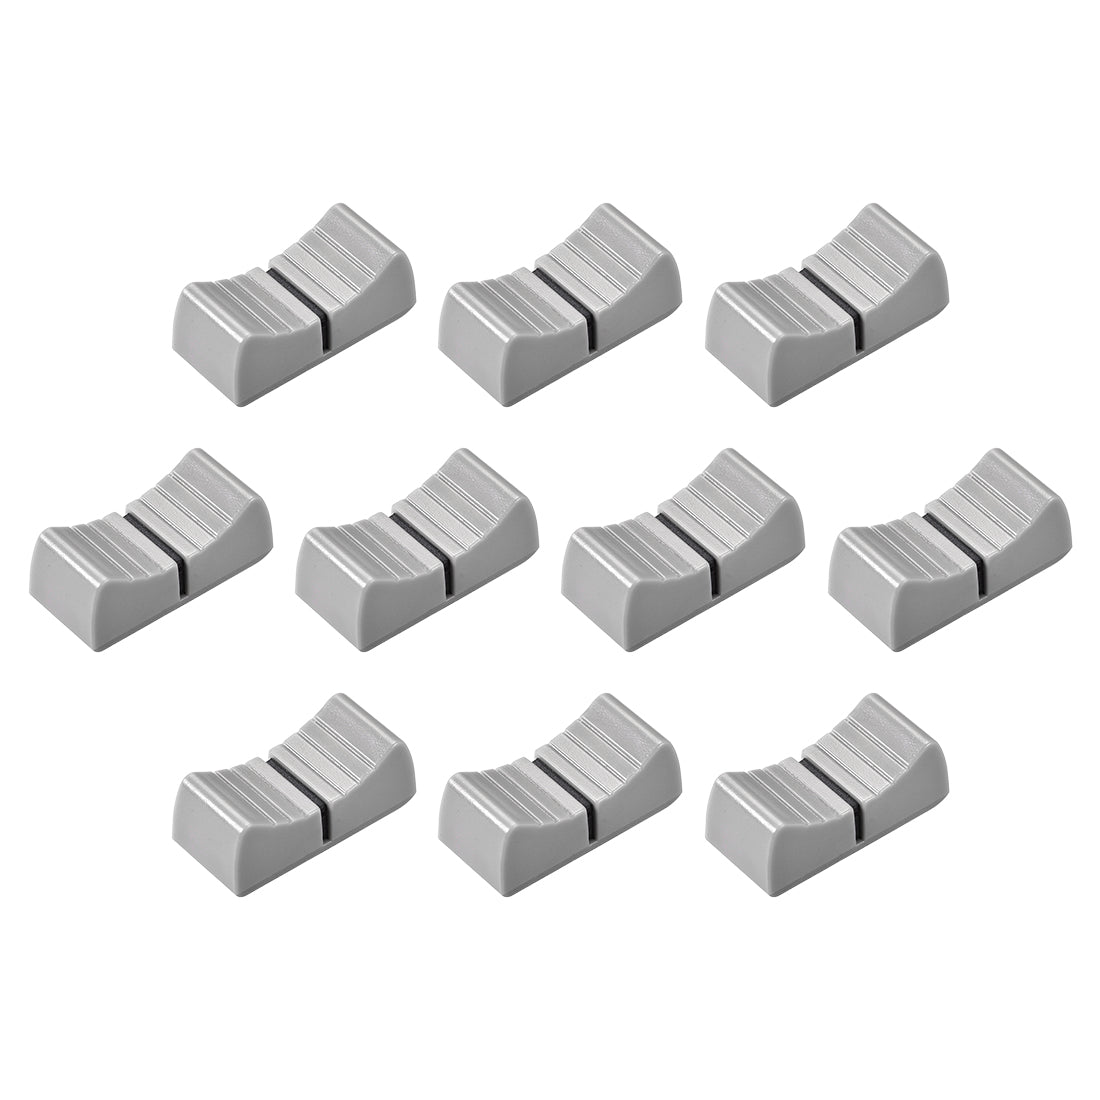 Uxcell Uxcell 24mmx11mmx10mm Console Mixer Slider Fader Knobs Replacement for Potentiometer Gray Knob Black Mark 10pcs